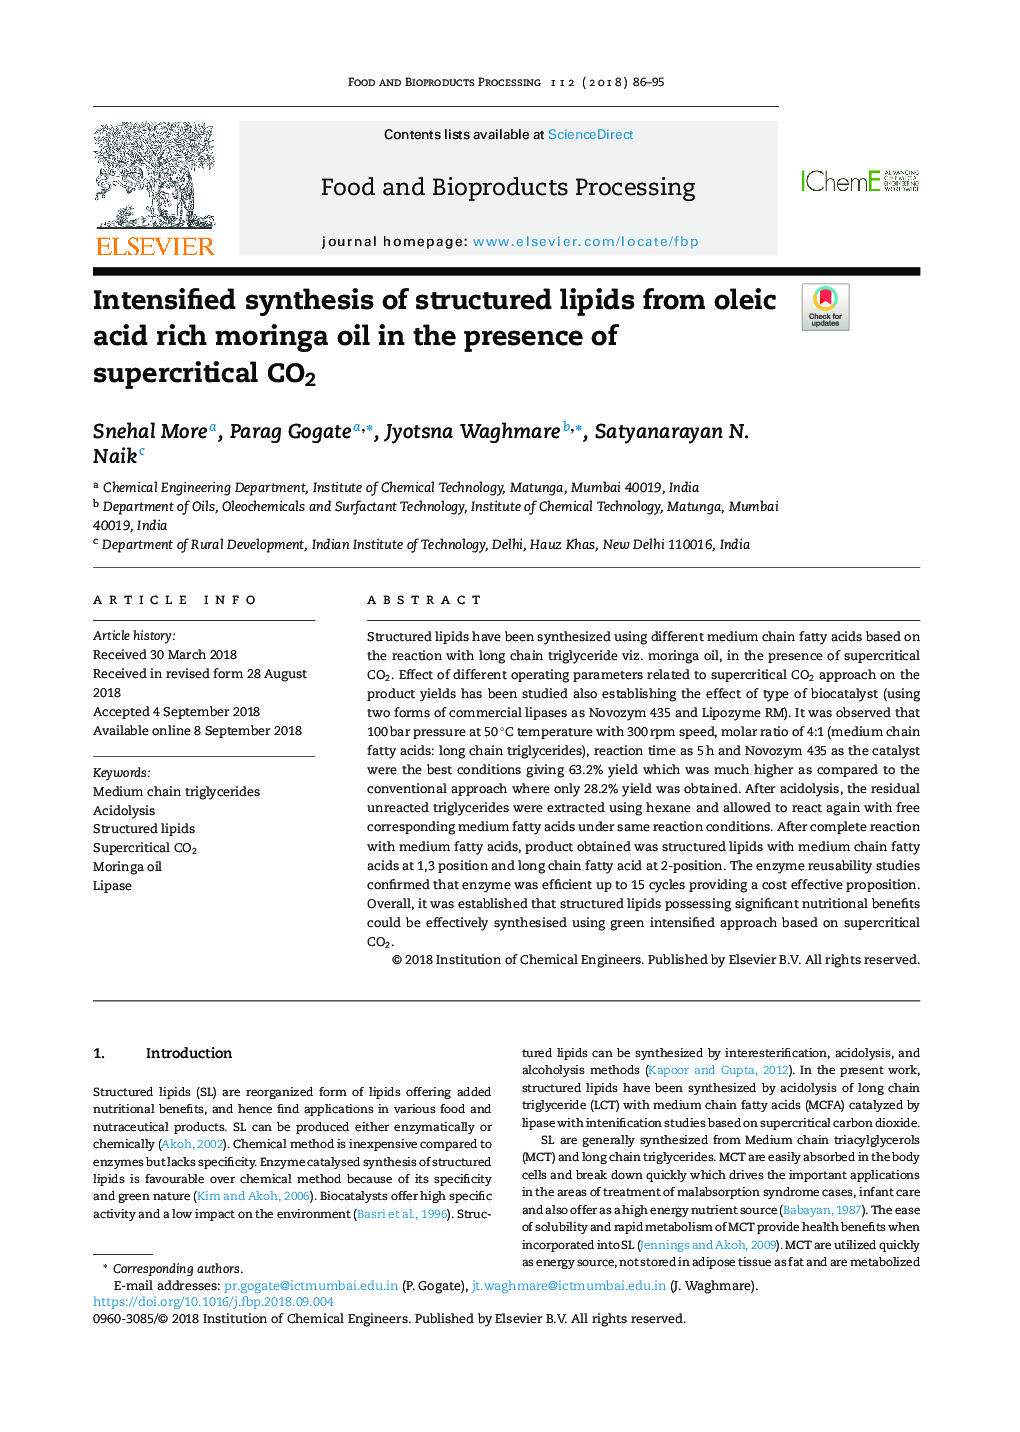 Intensified synthesis of structured lipids from oleic acid rich moringa oil in the presence of supercritical CO2